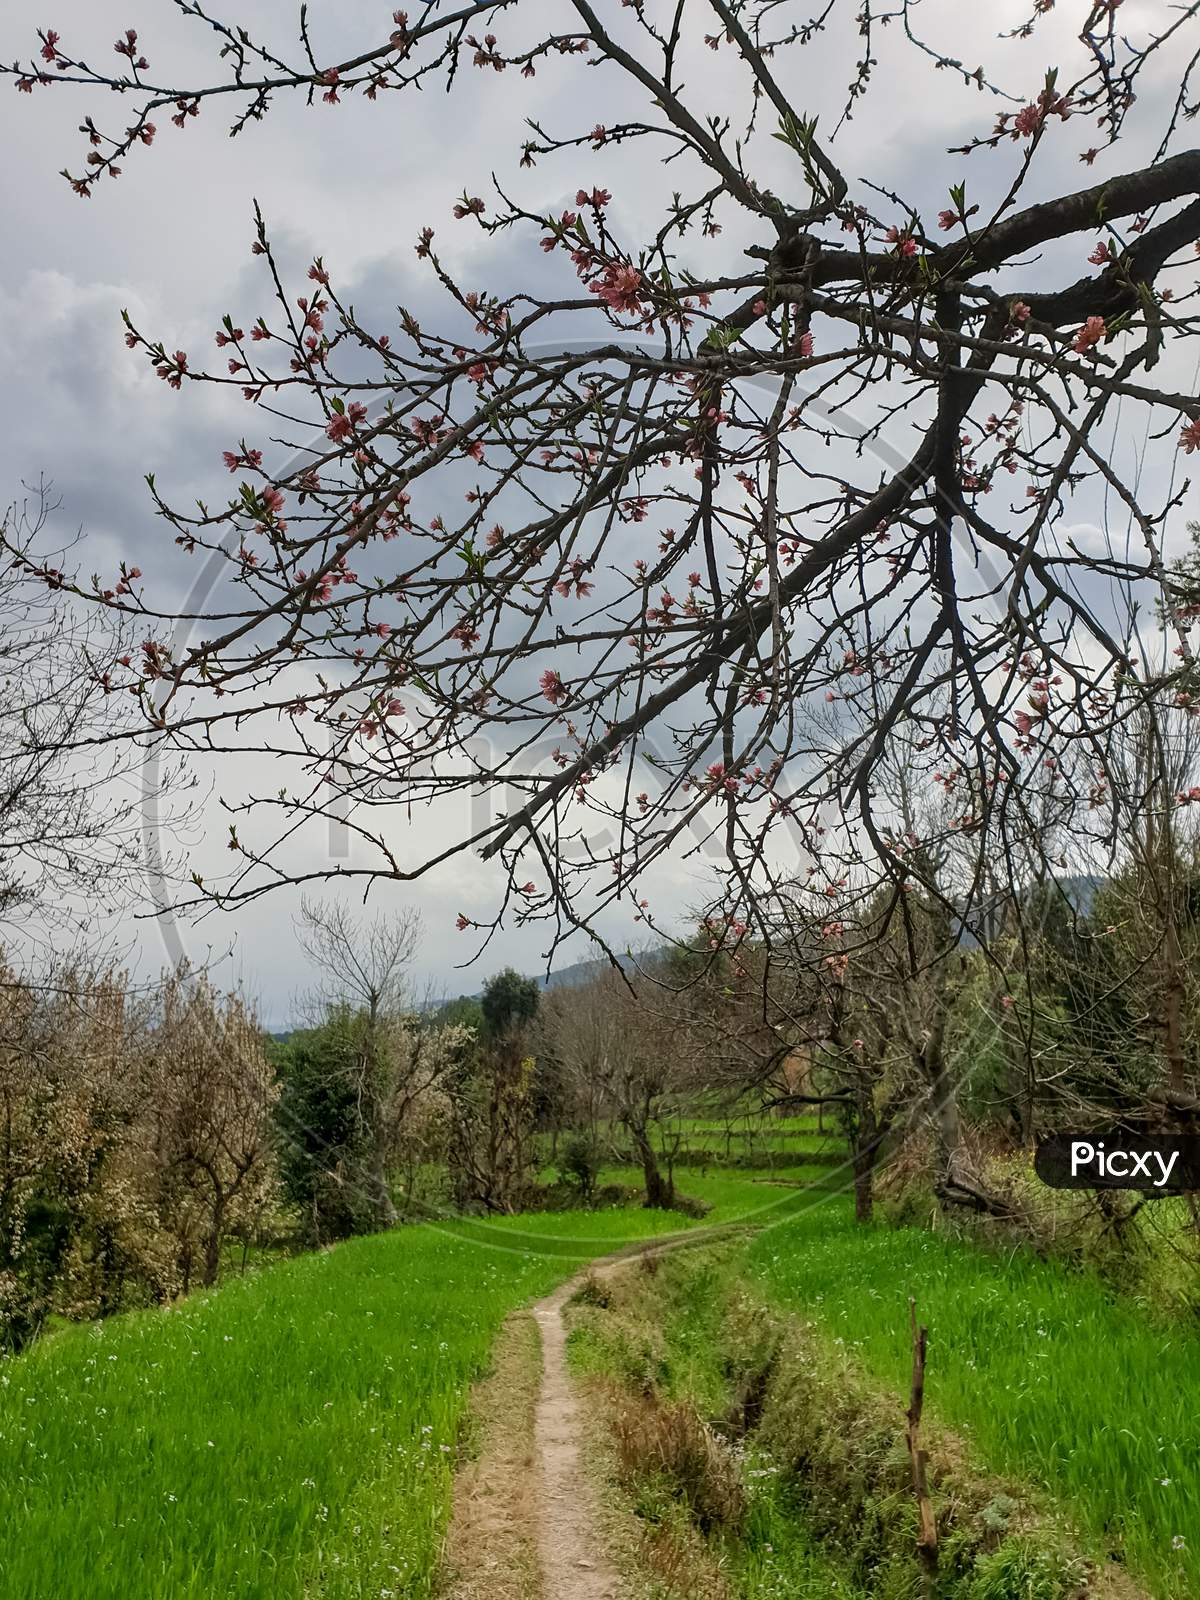 Portrait of a short way beside of beautiful wheat farm with peach tree in spring season in hilly area of Himachal Pradesh, India